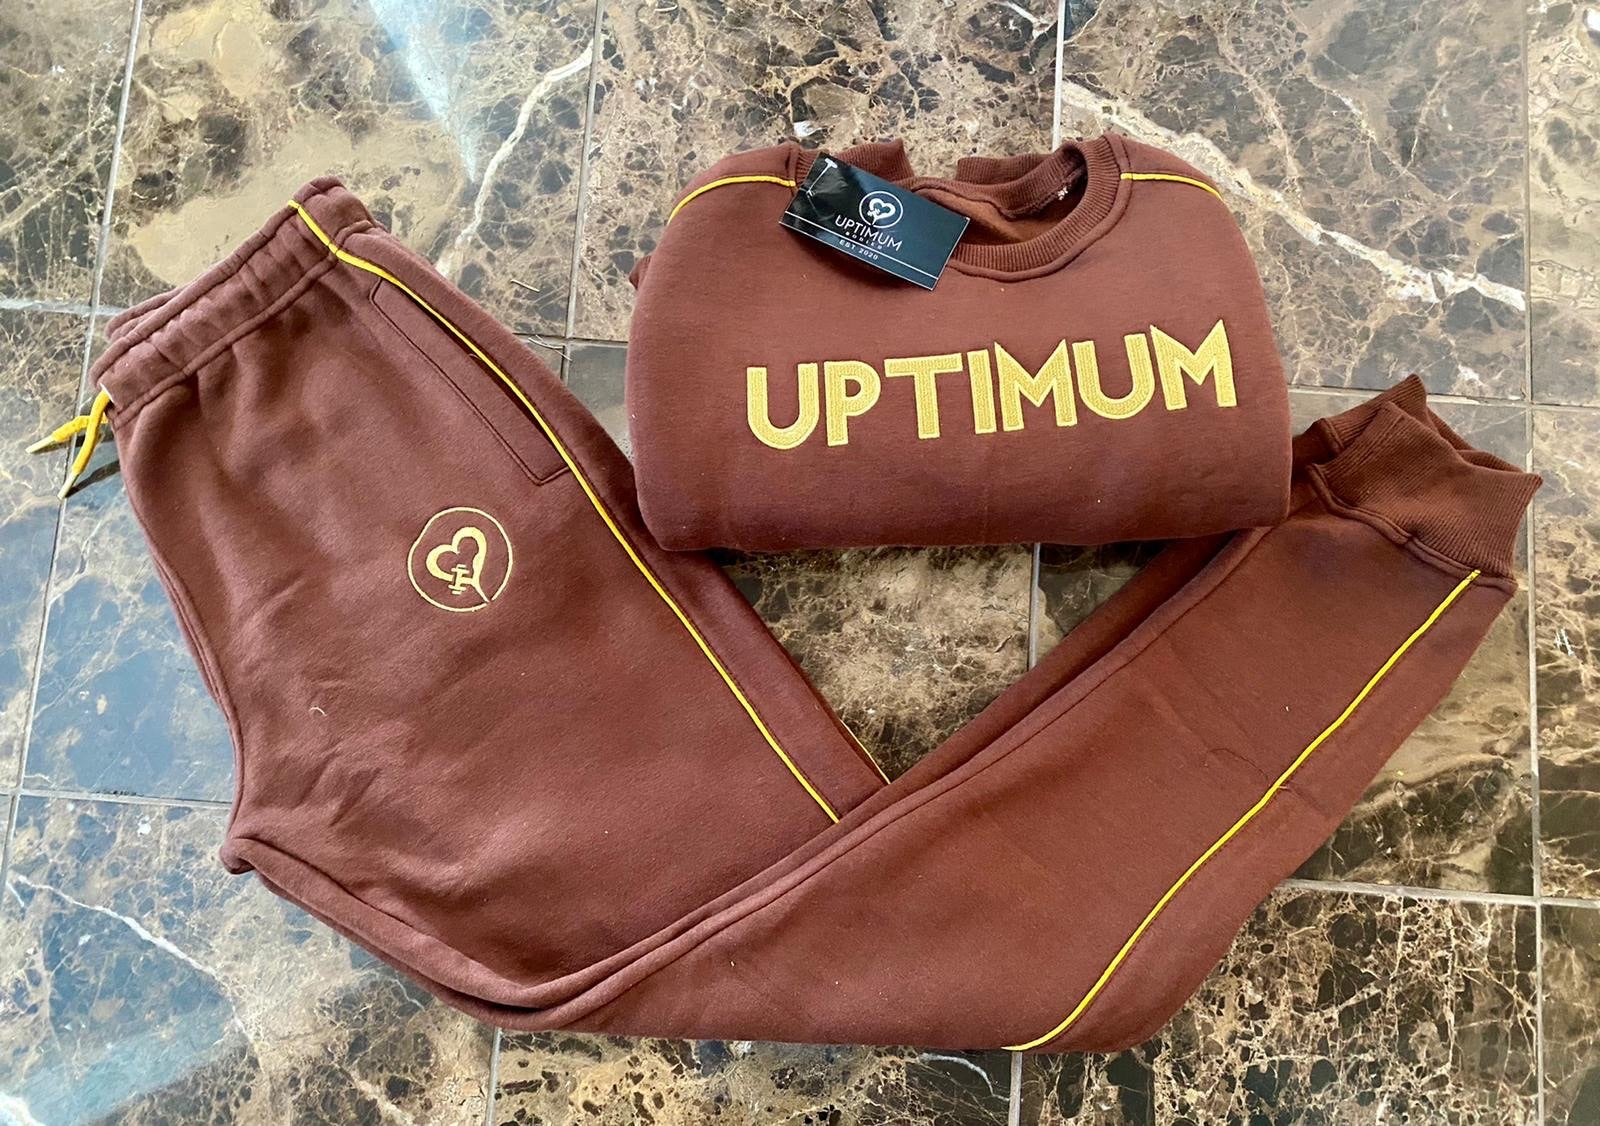 So Golden Chocolate Joggers - Uptimum Bodied Online